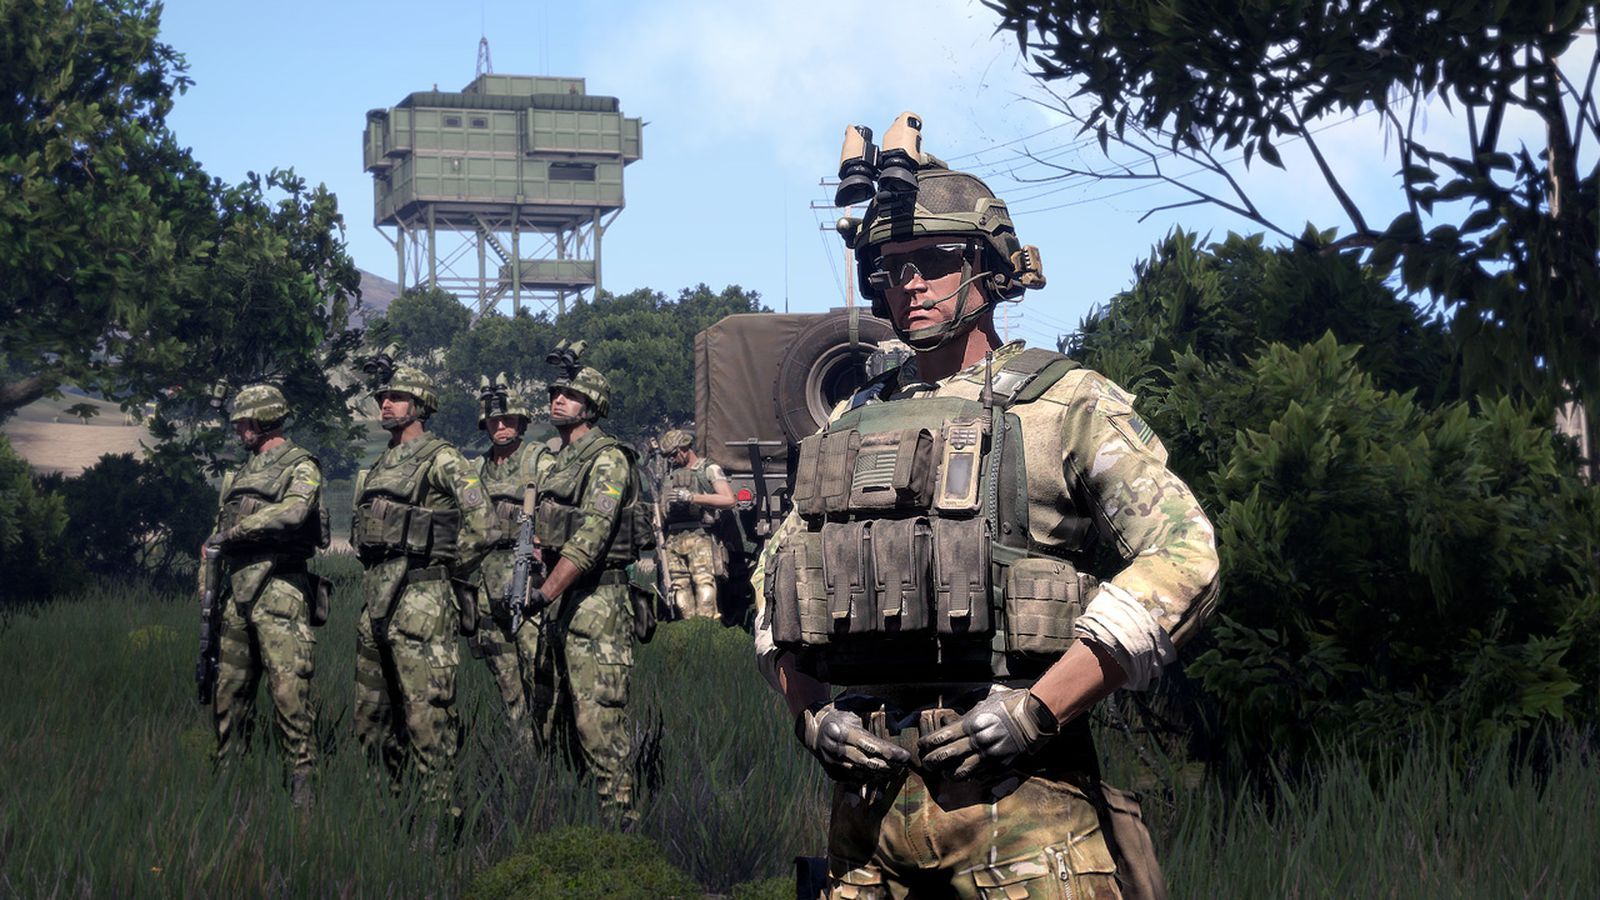 Arma 3's Bootcamp update looks to ease new players into the game